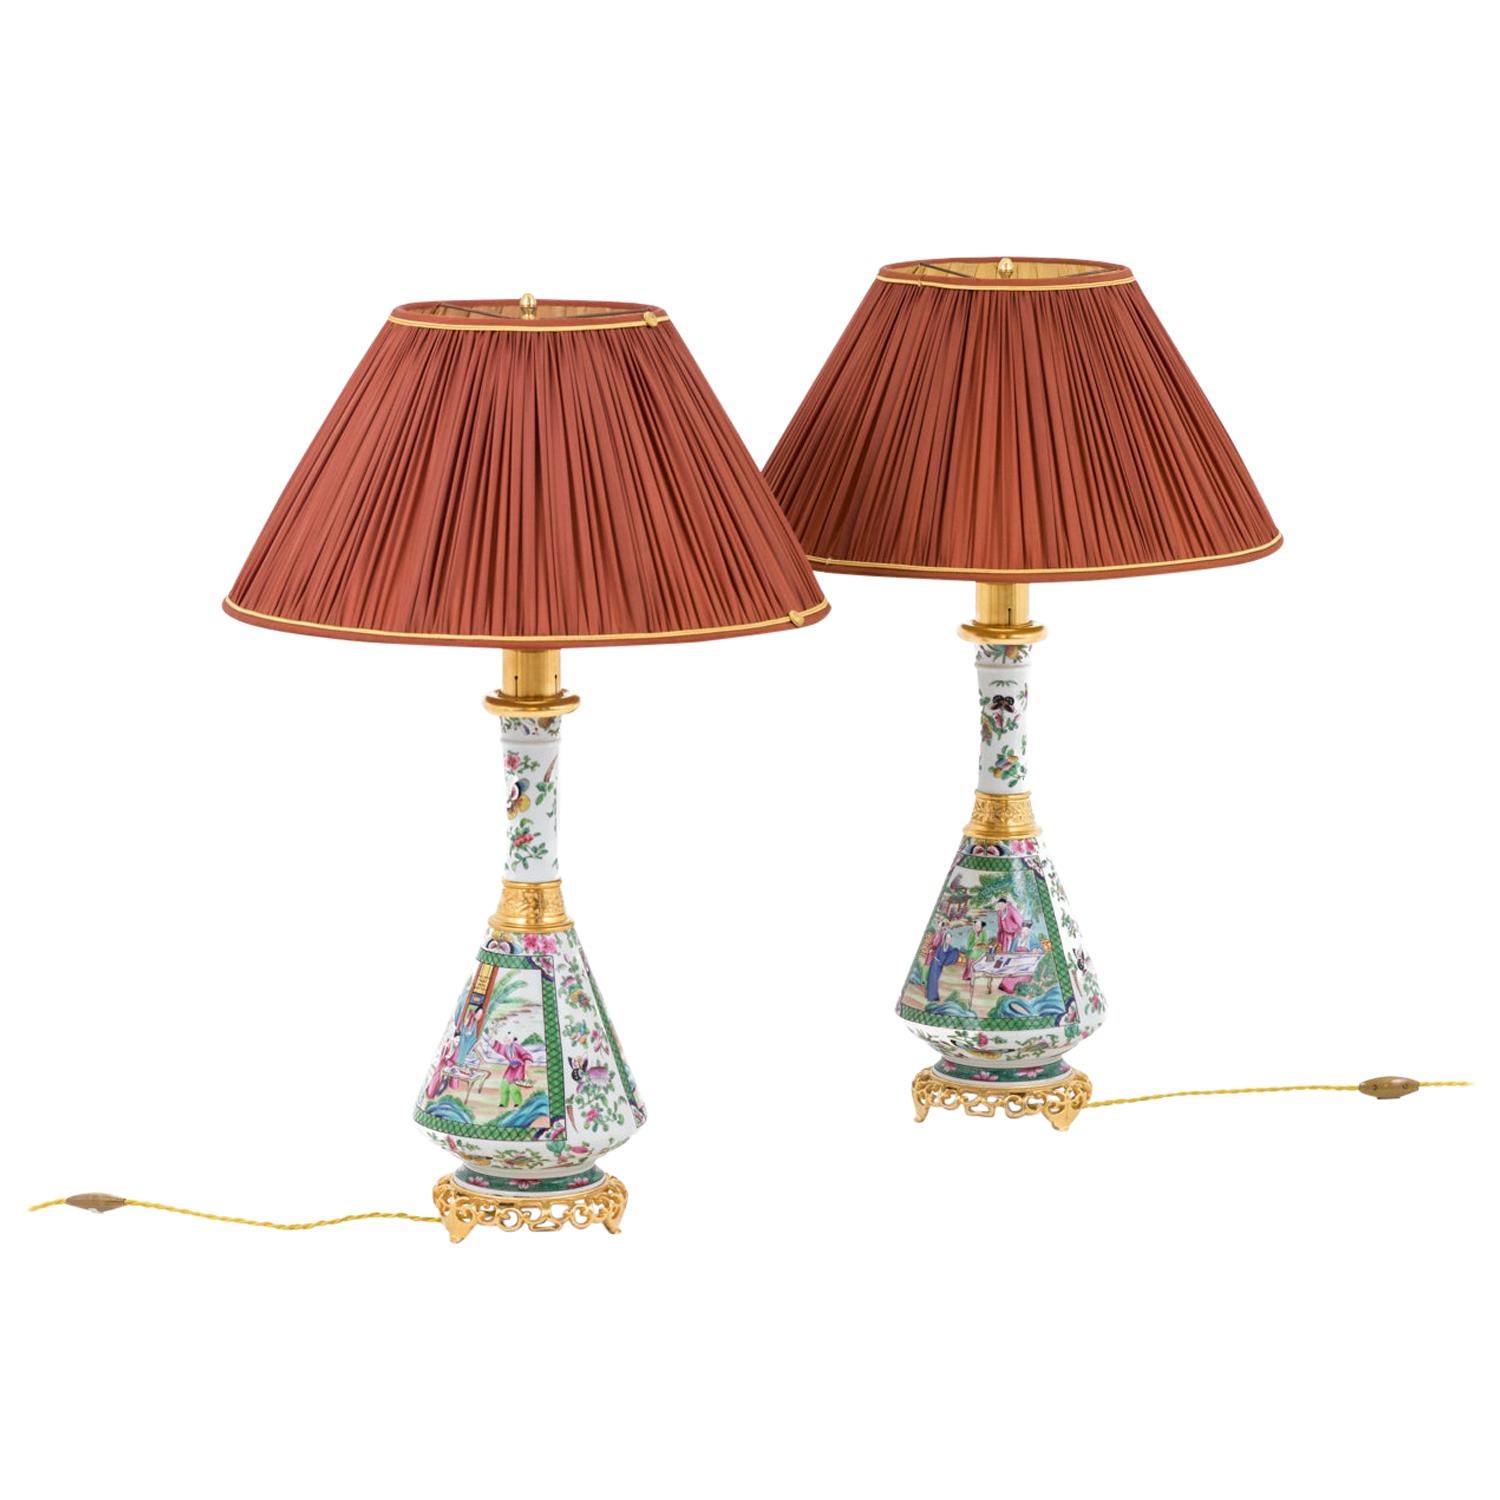 Pair of Lamps in Canton Porcelain, circa 1880